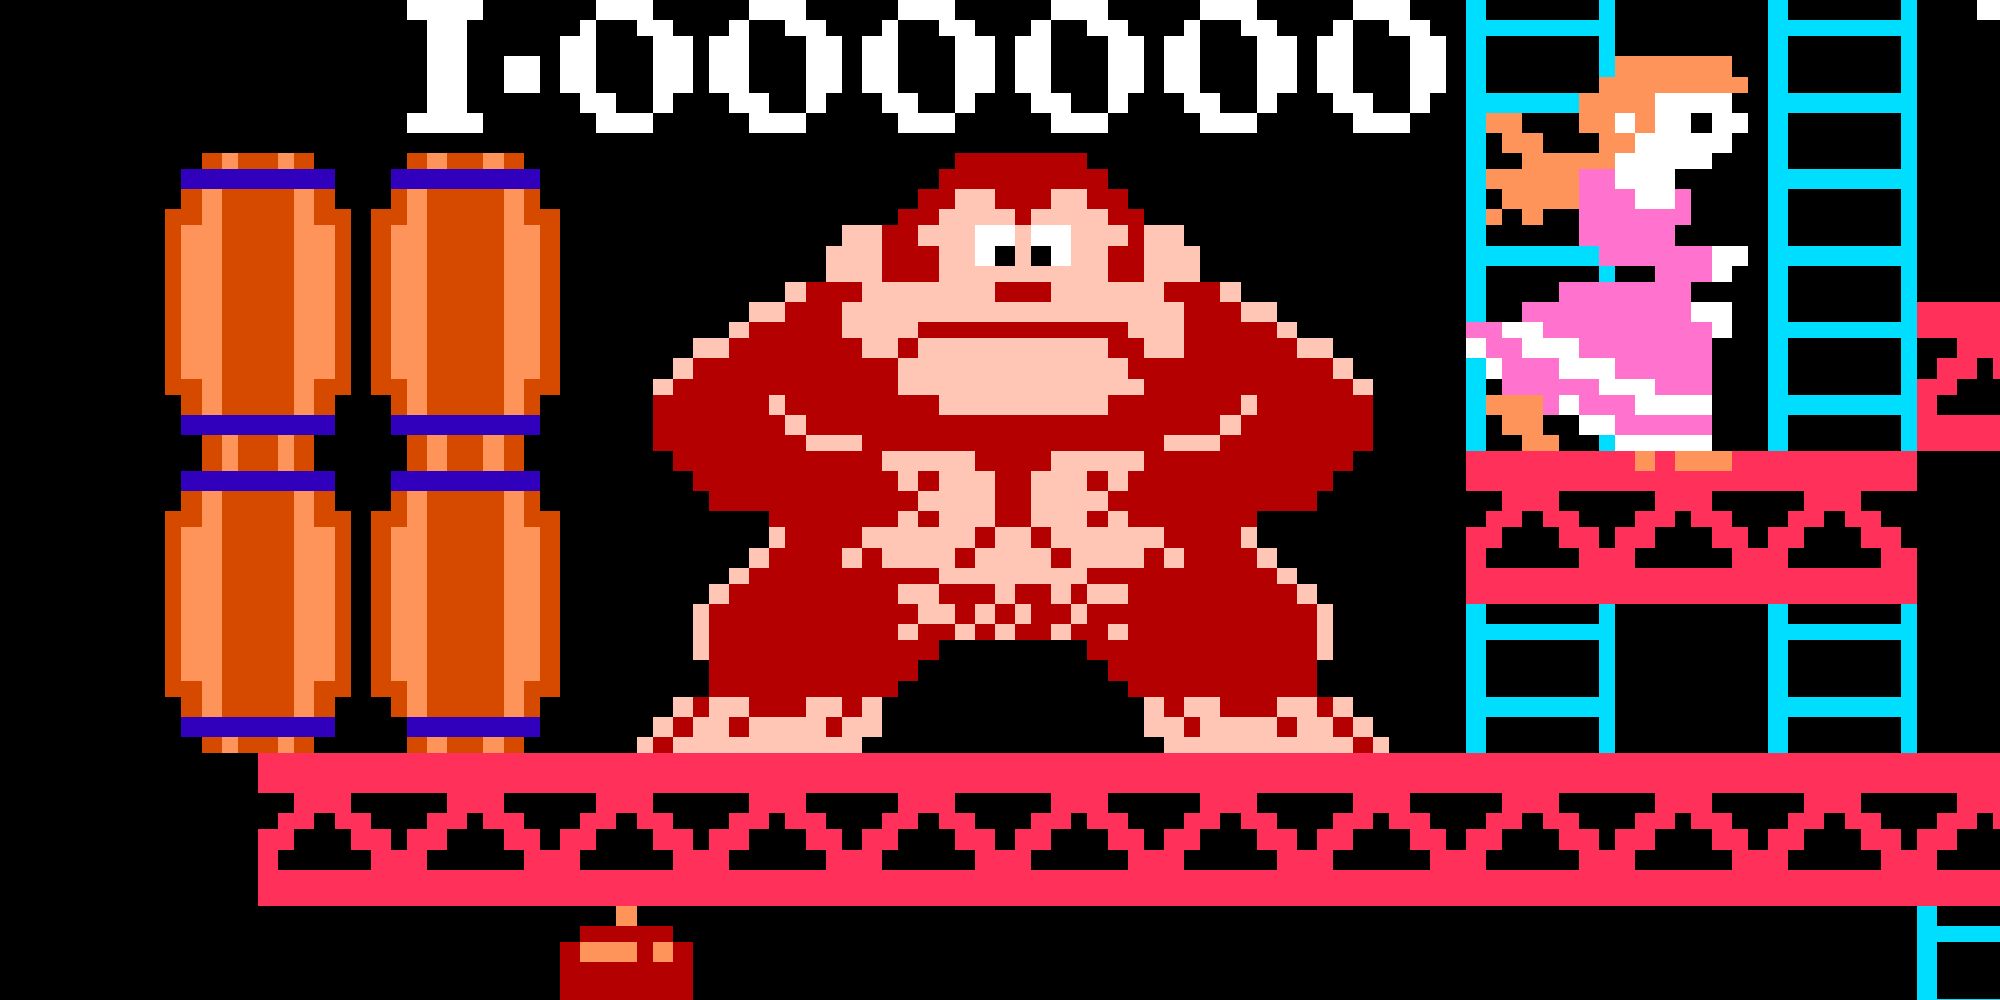 Donkey Kong standing with Pauline in the original arcade game